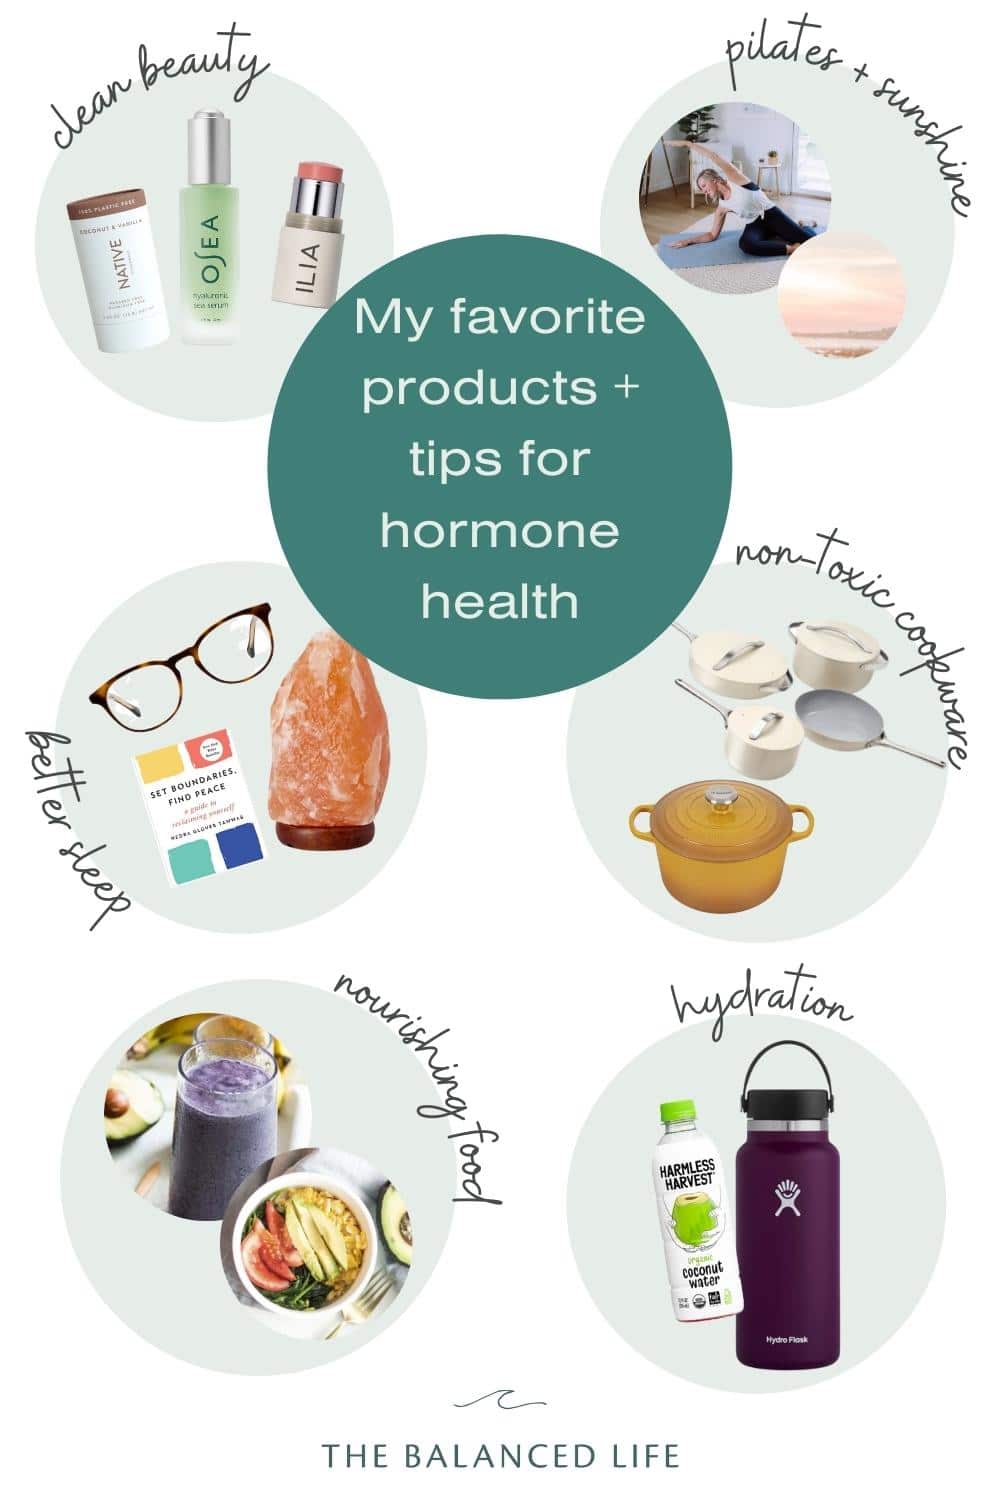 My favorite products + tips for hormone health